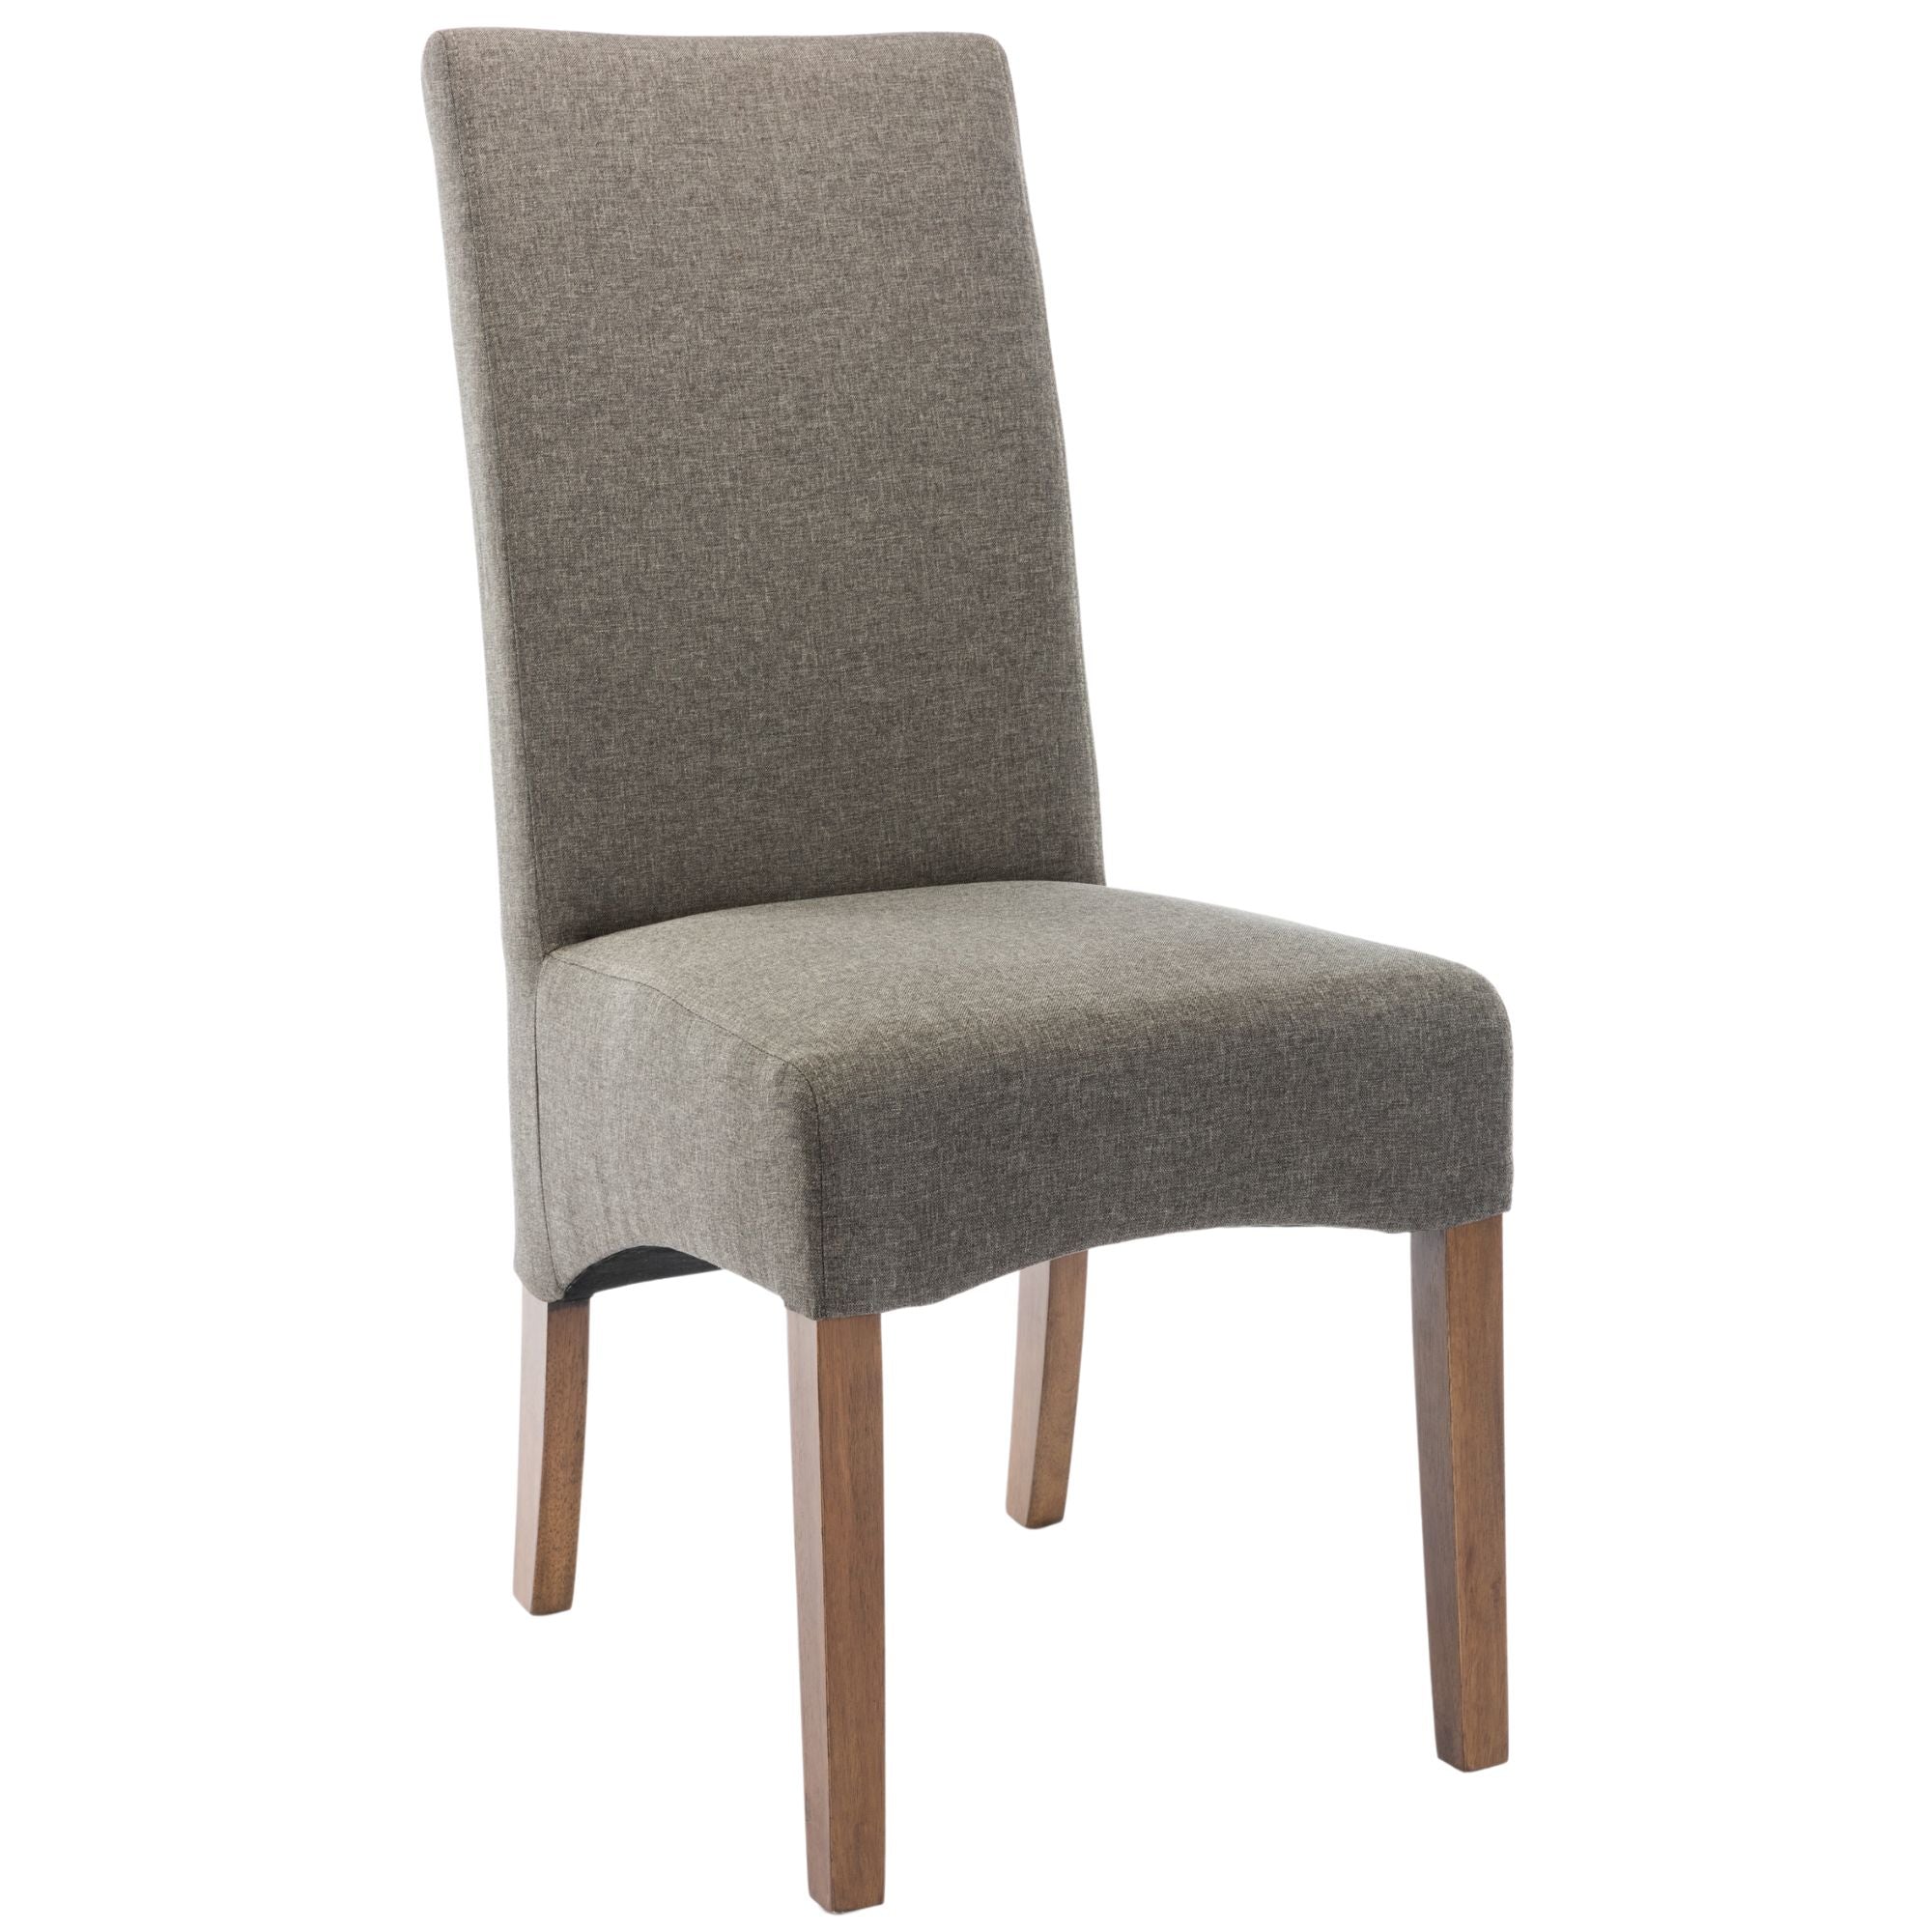 Aksa Fabric Upholstered Dining Chair Set of 6 Solid Pine Wood Furniture - Grey Deals499